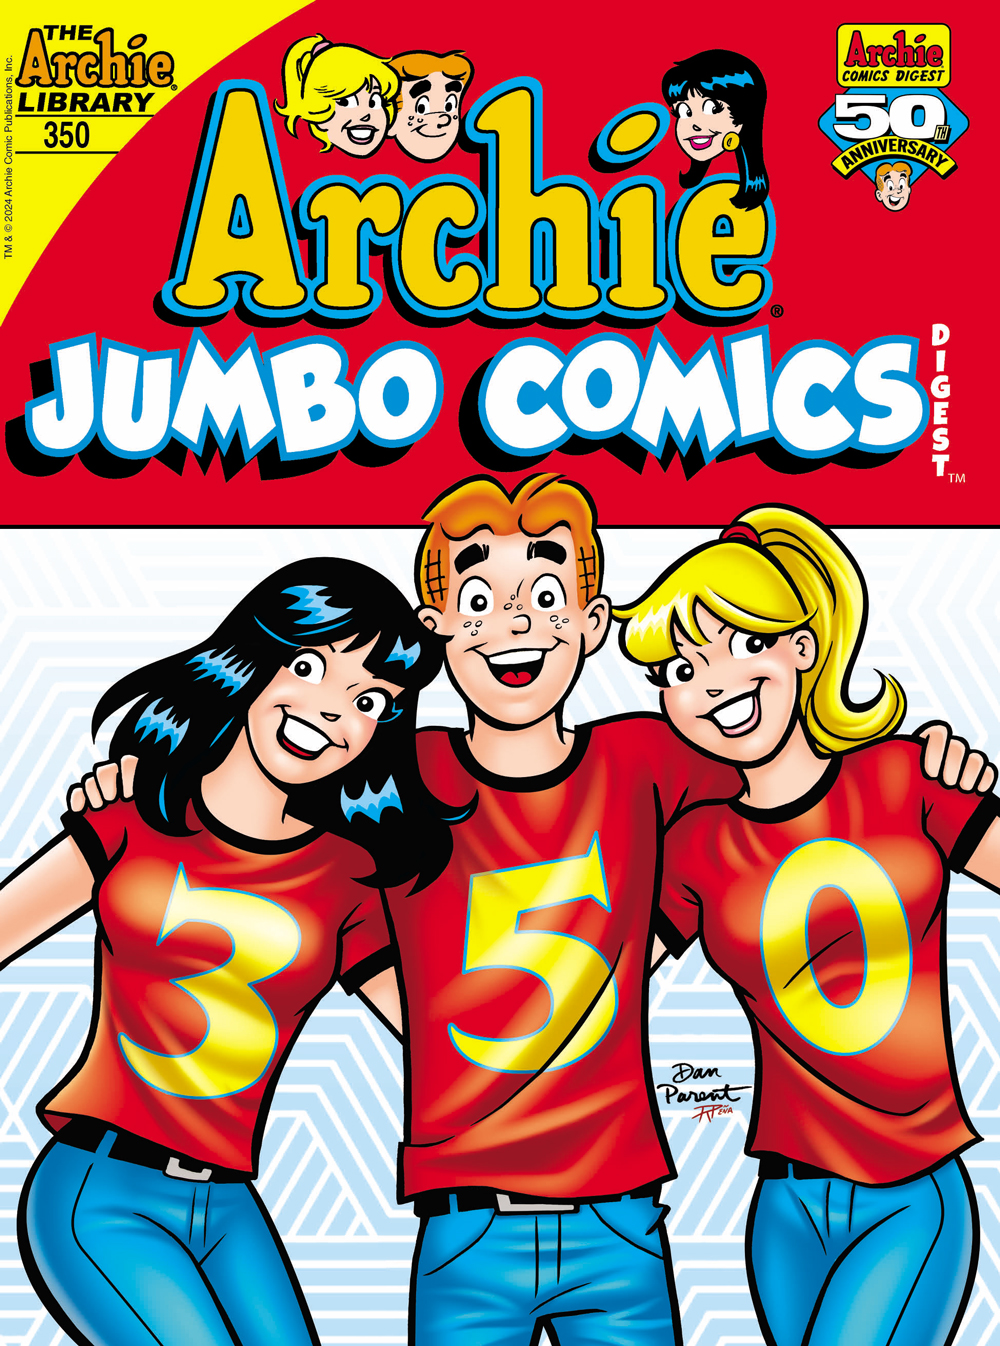 Archie, Betty, and Veronica smile at the viewer, each wearing shirts with a different number; when combined, the number is 350, which is the issue number the image commemorates.